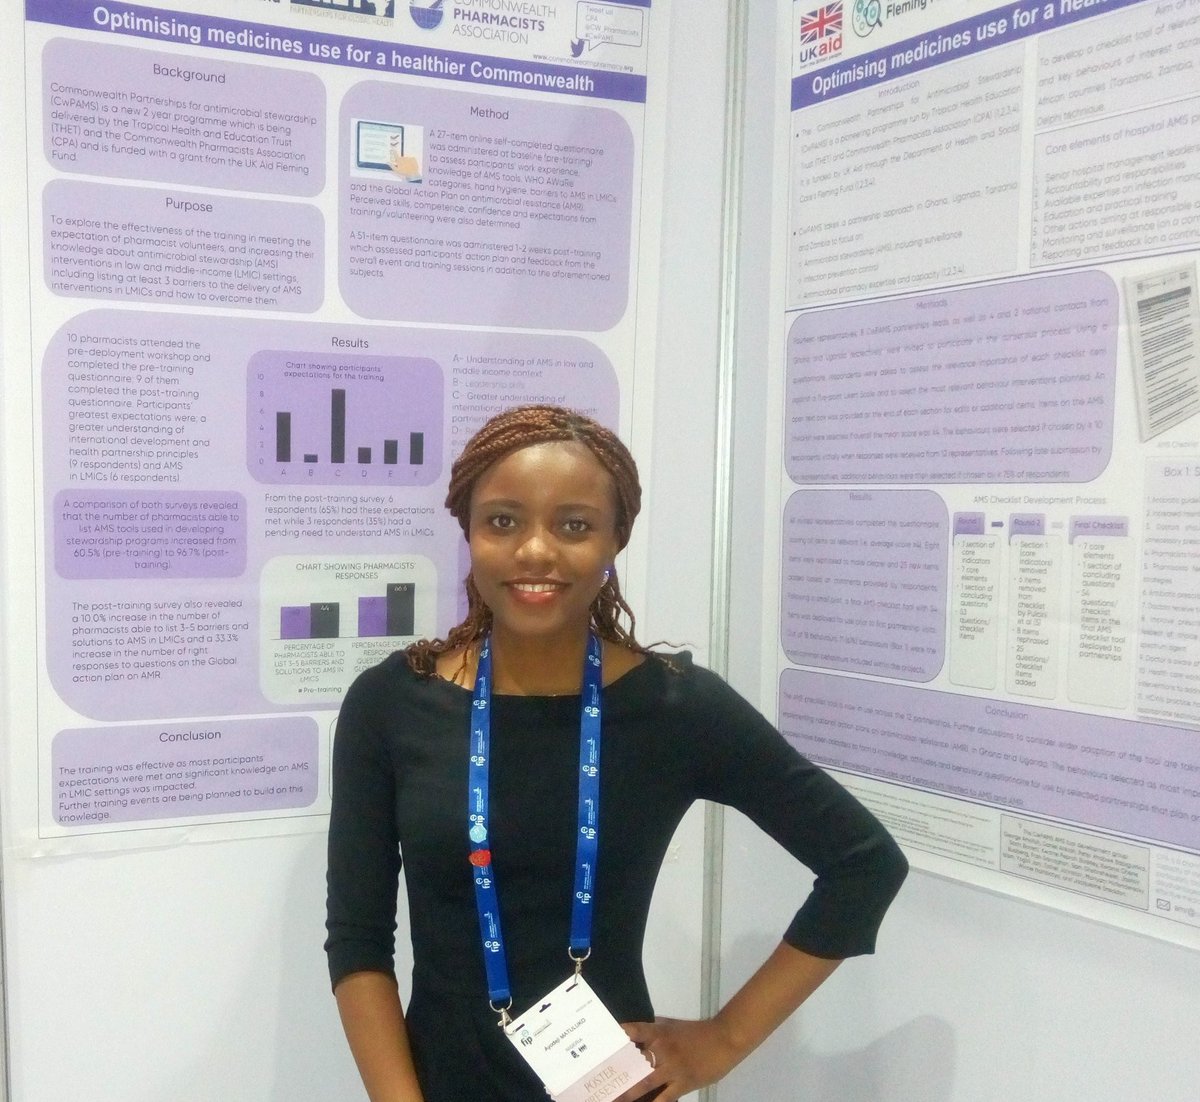 Check out our #Commonwealth work today during the poster sessions @FIP_org #FIPcongress #fip2019 #CwPAMS we are proud of our #AMR intern @AyodejiMatuluko - nominated for best poster award - well done ! @DrDianeAshiru @ReturnoftheVIC